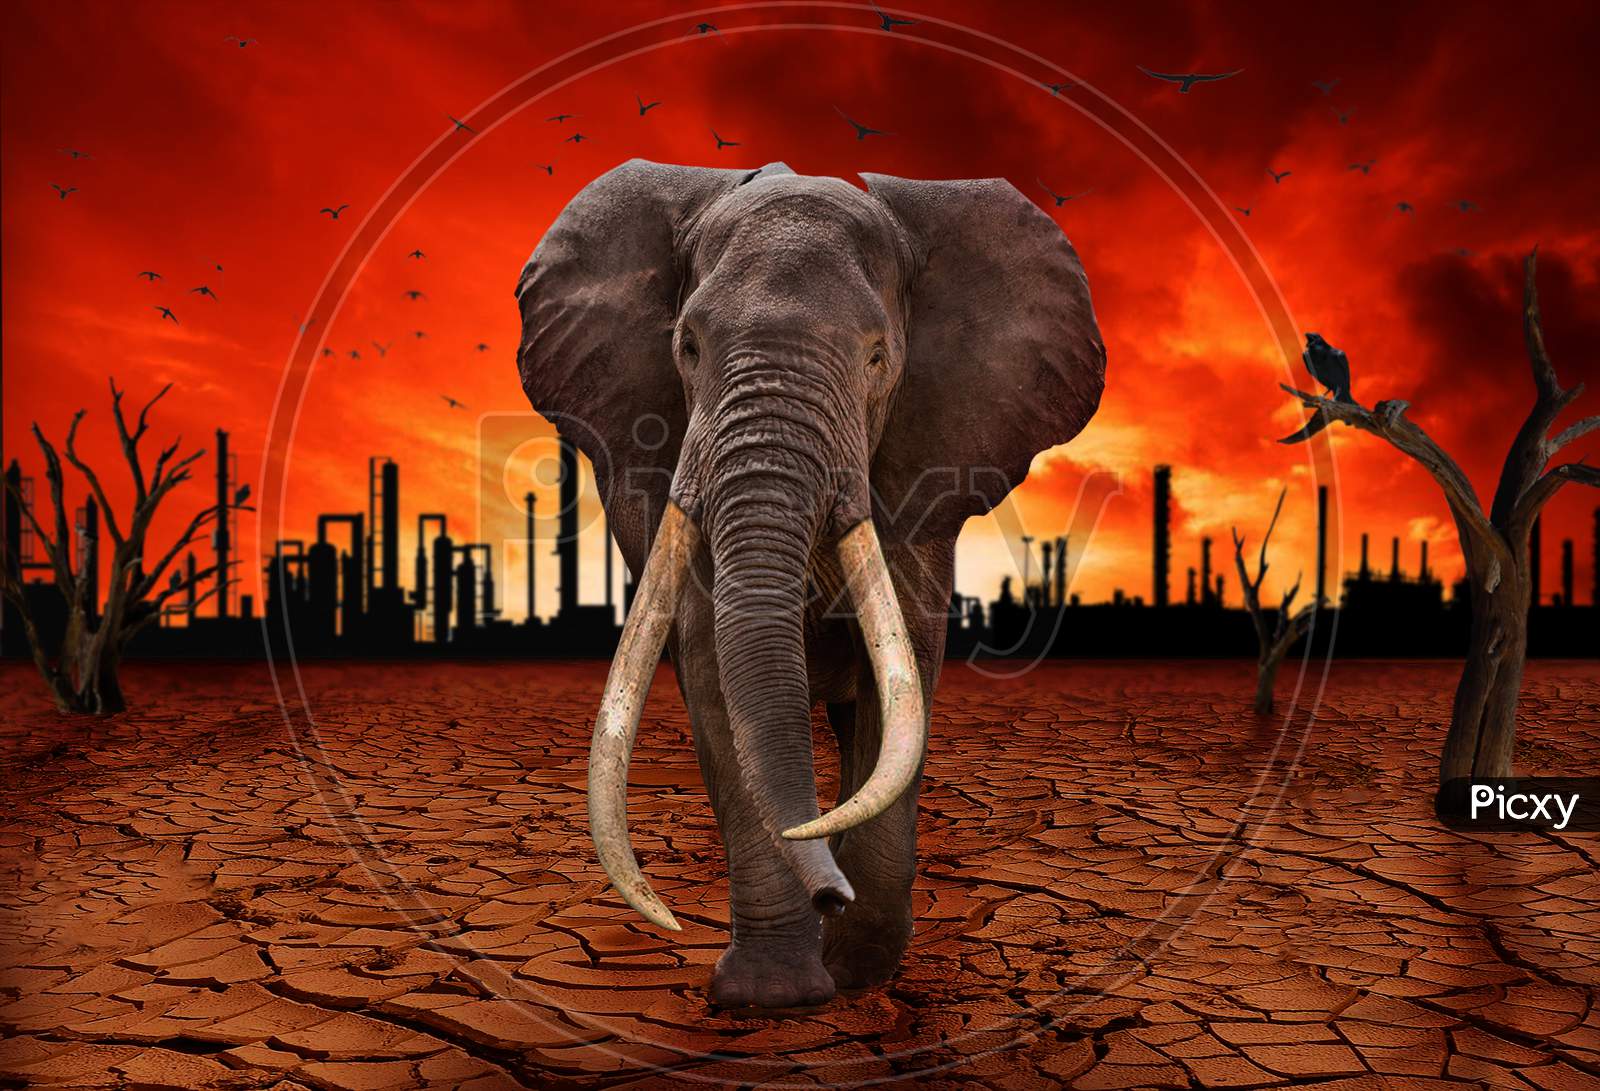 Global warming , animals are fleeing climate change, drought , Elephant